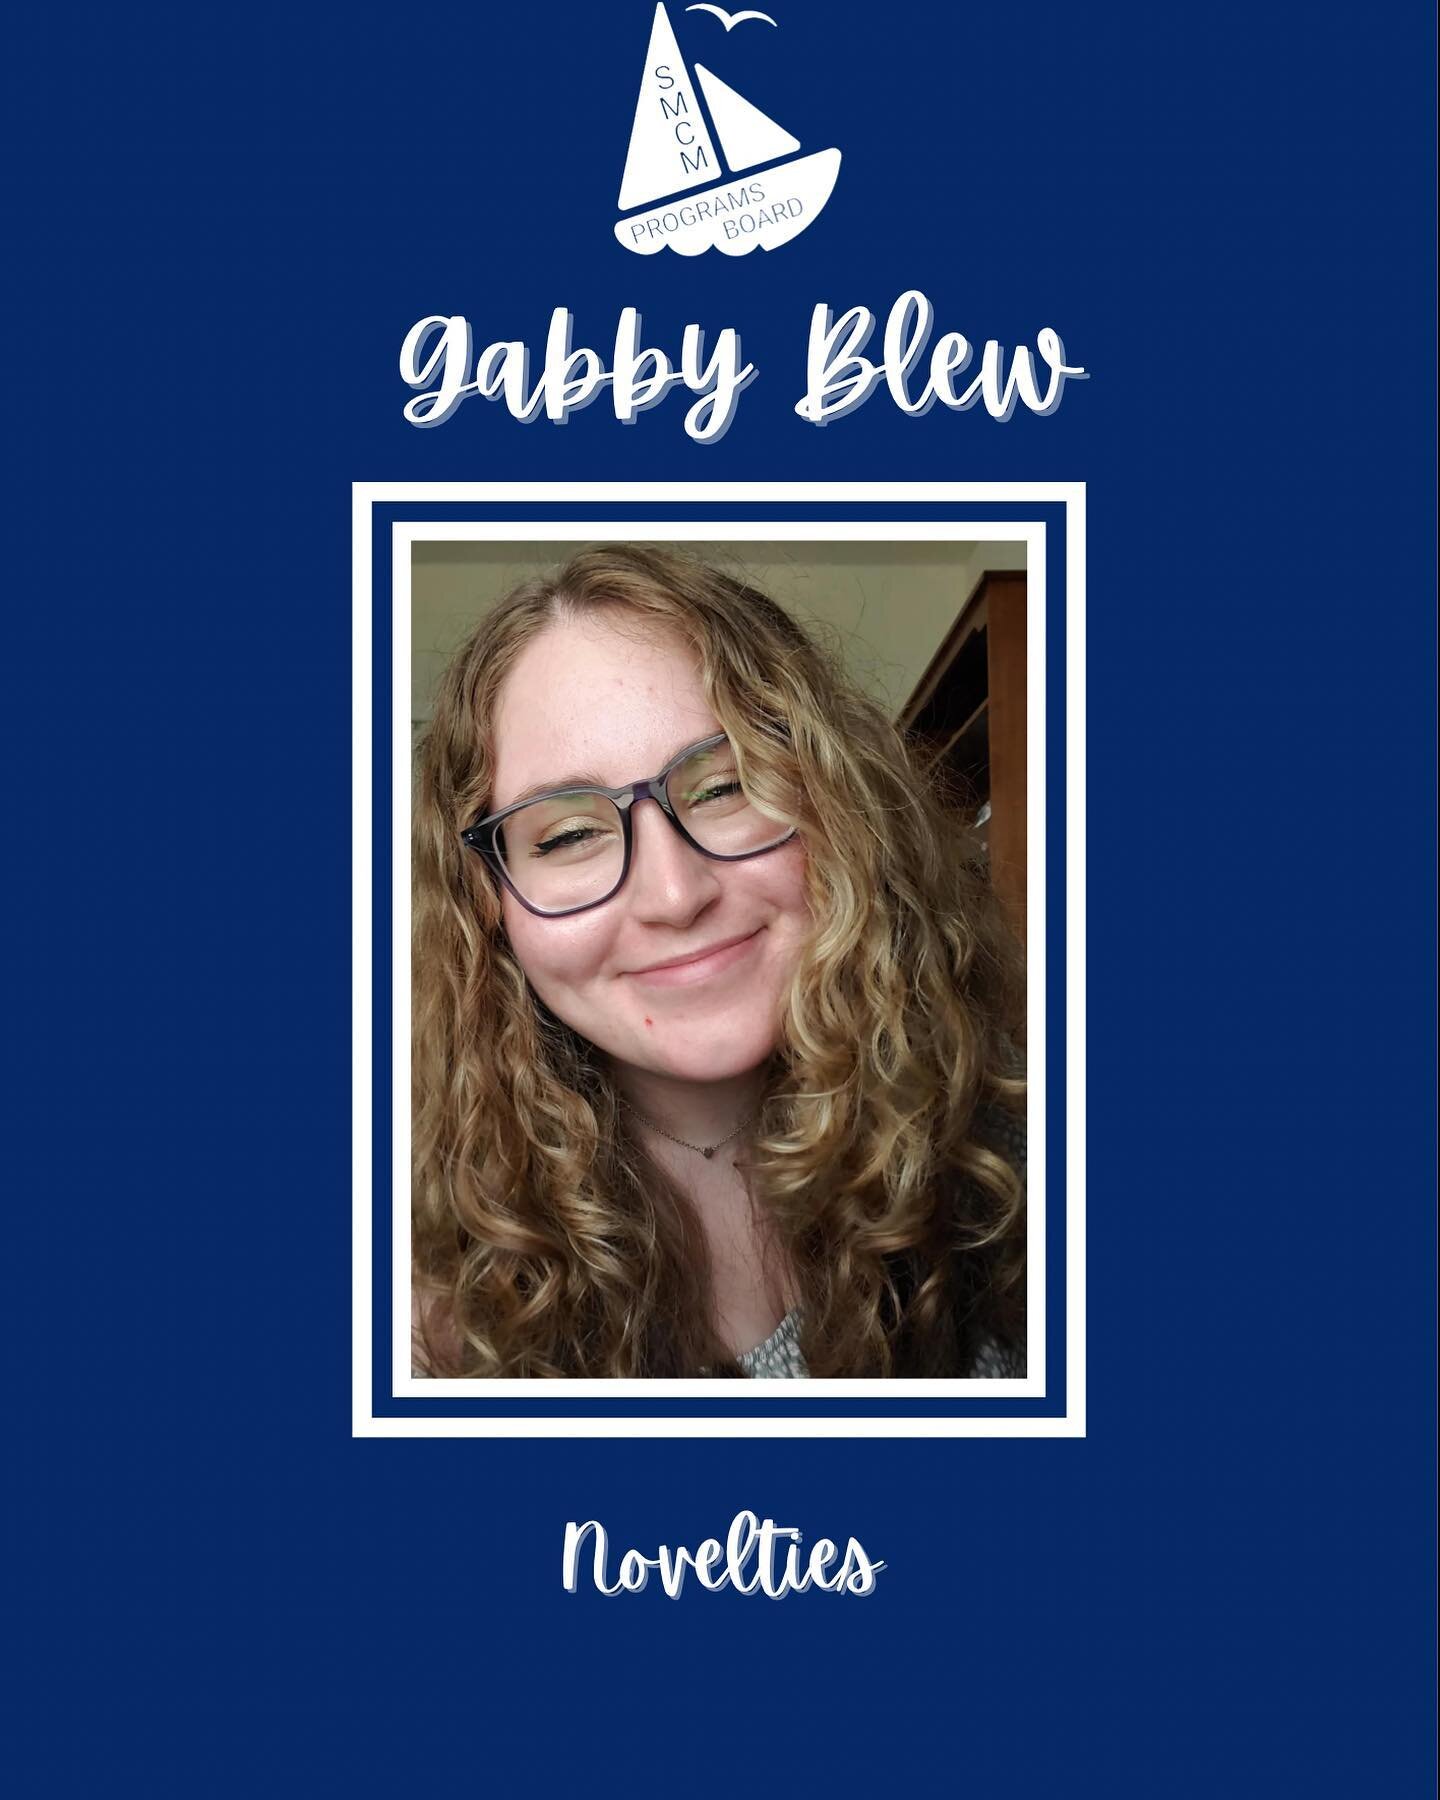 Happy Friday Seahawks!!! Today&rsquo;s takeover is by our amazing Novelties Chair, Gabby Blew!!